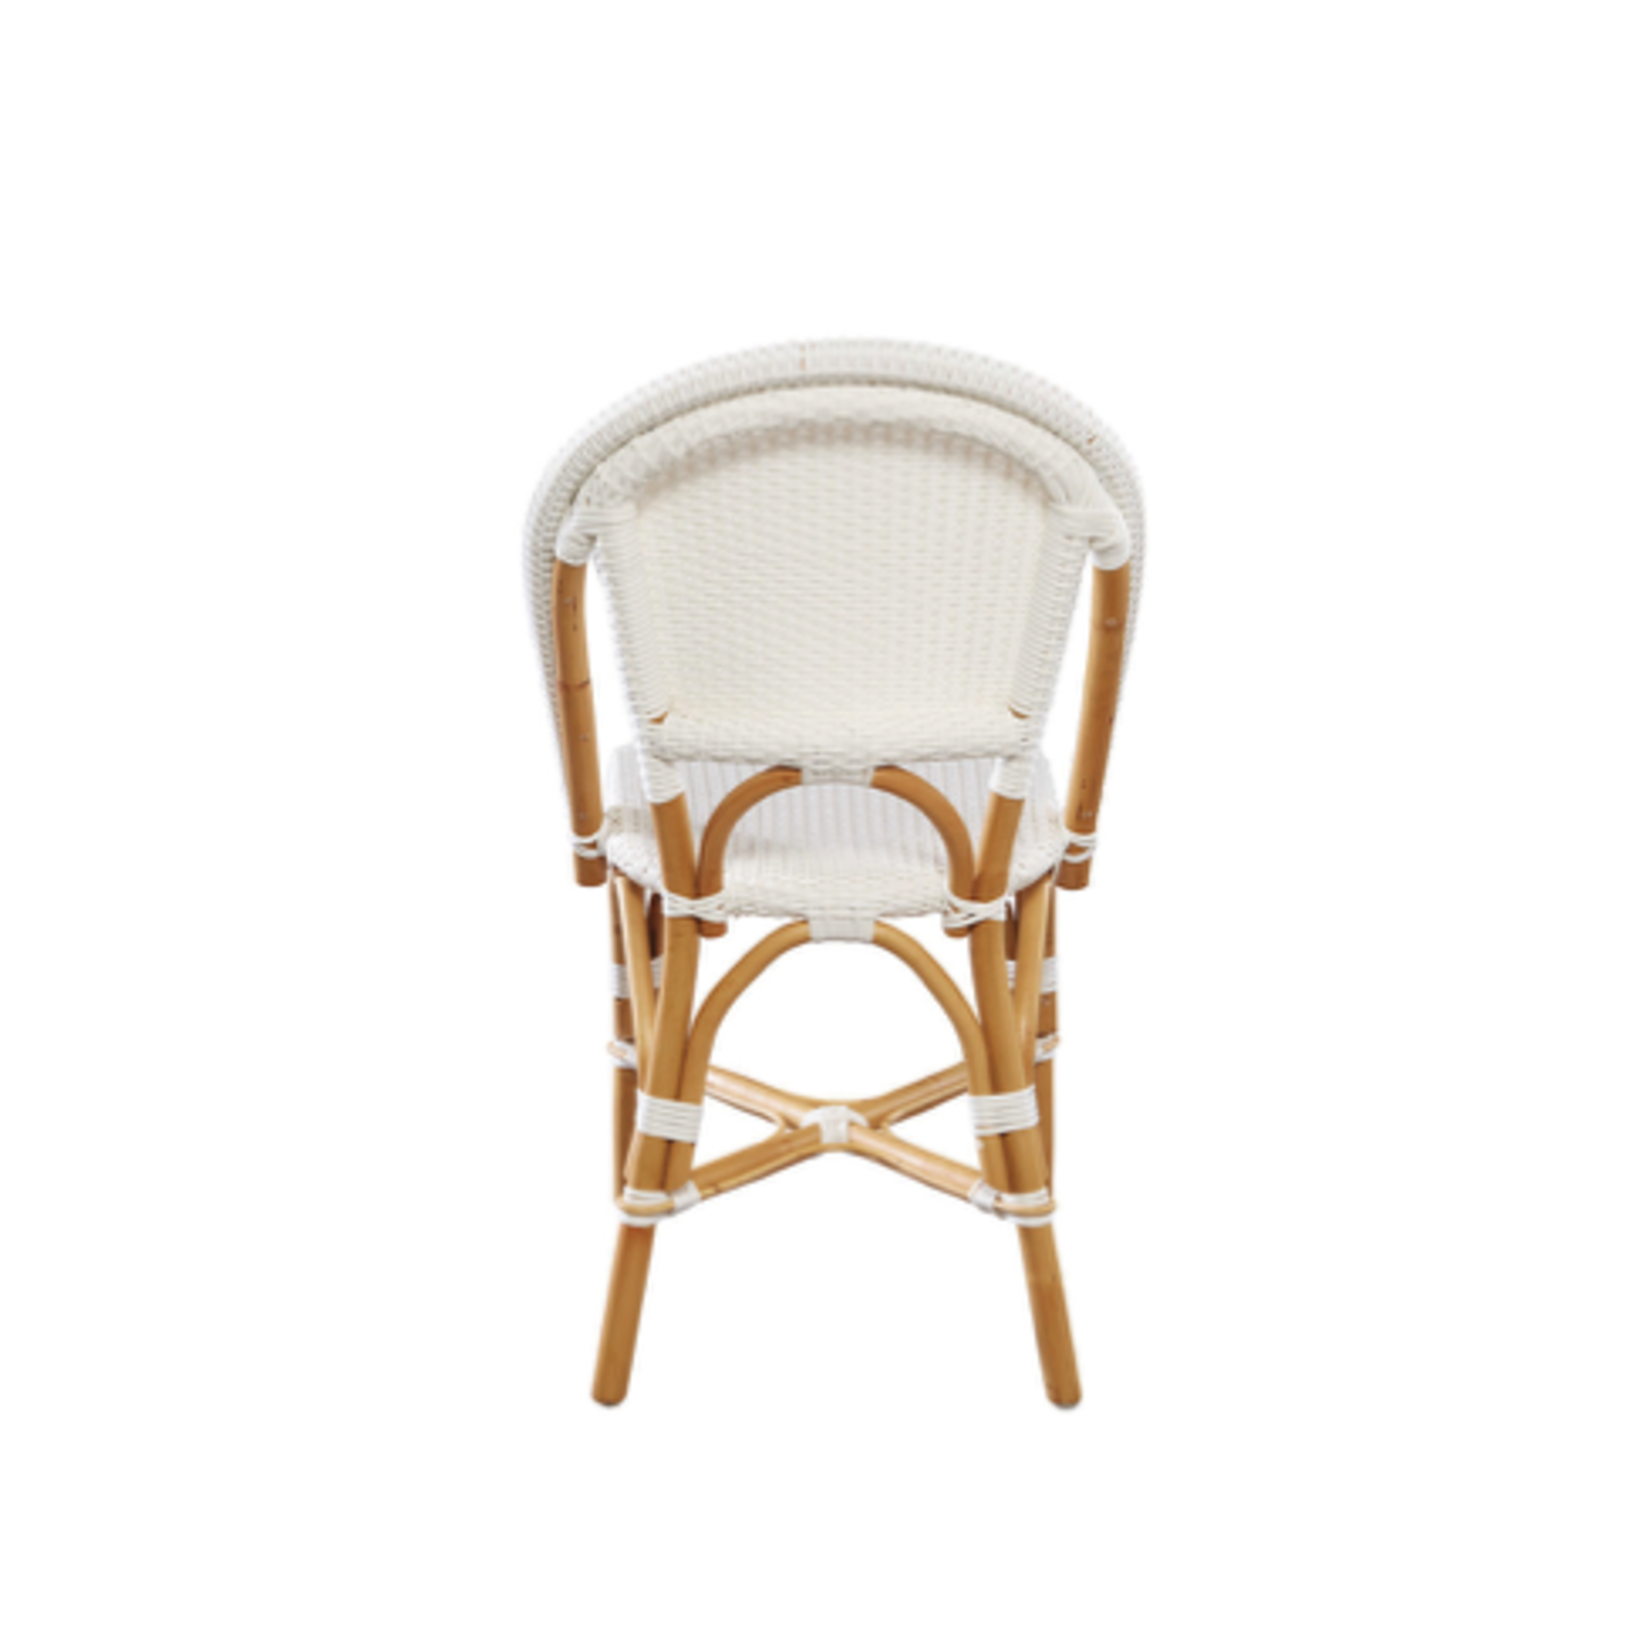 Outside The Box Leroy White Woven & Rattan Dining Chair